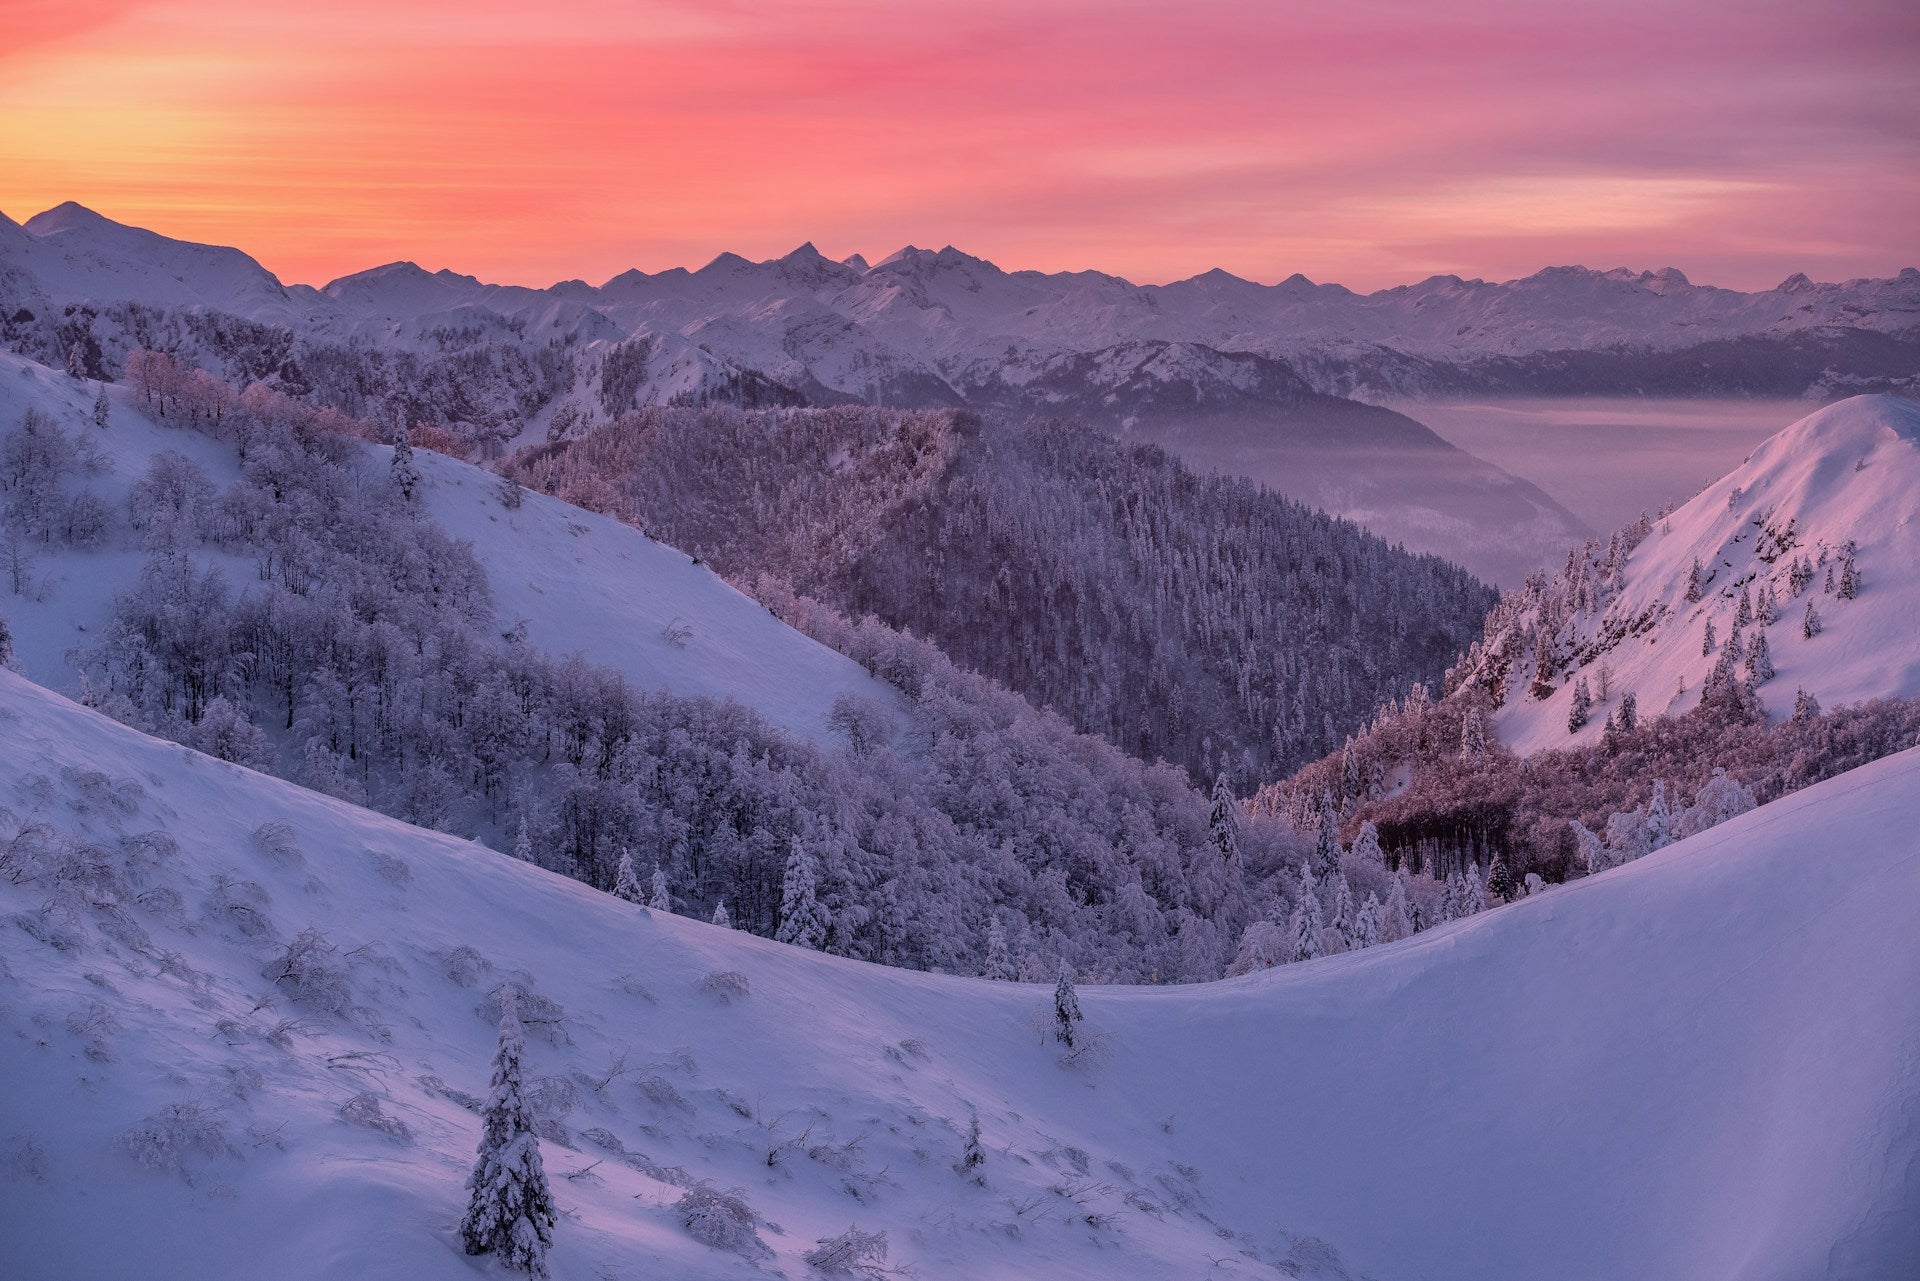 A vibrant pink sunset over a snow-covered mountain range